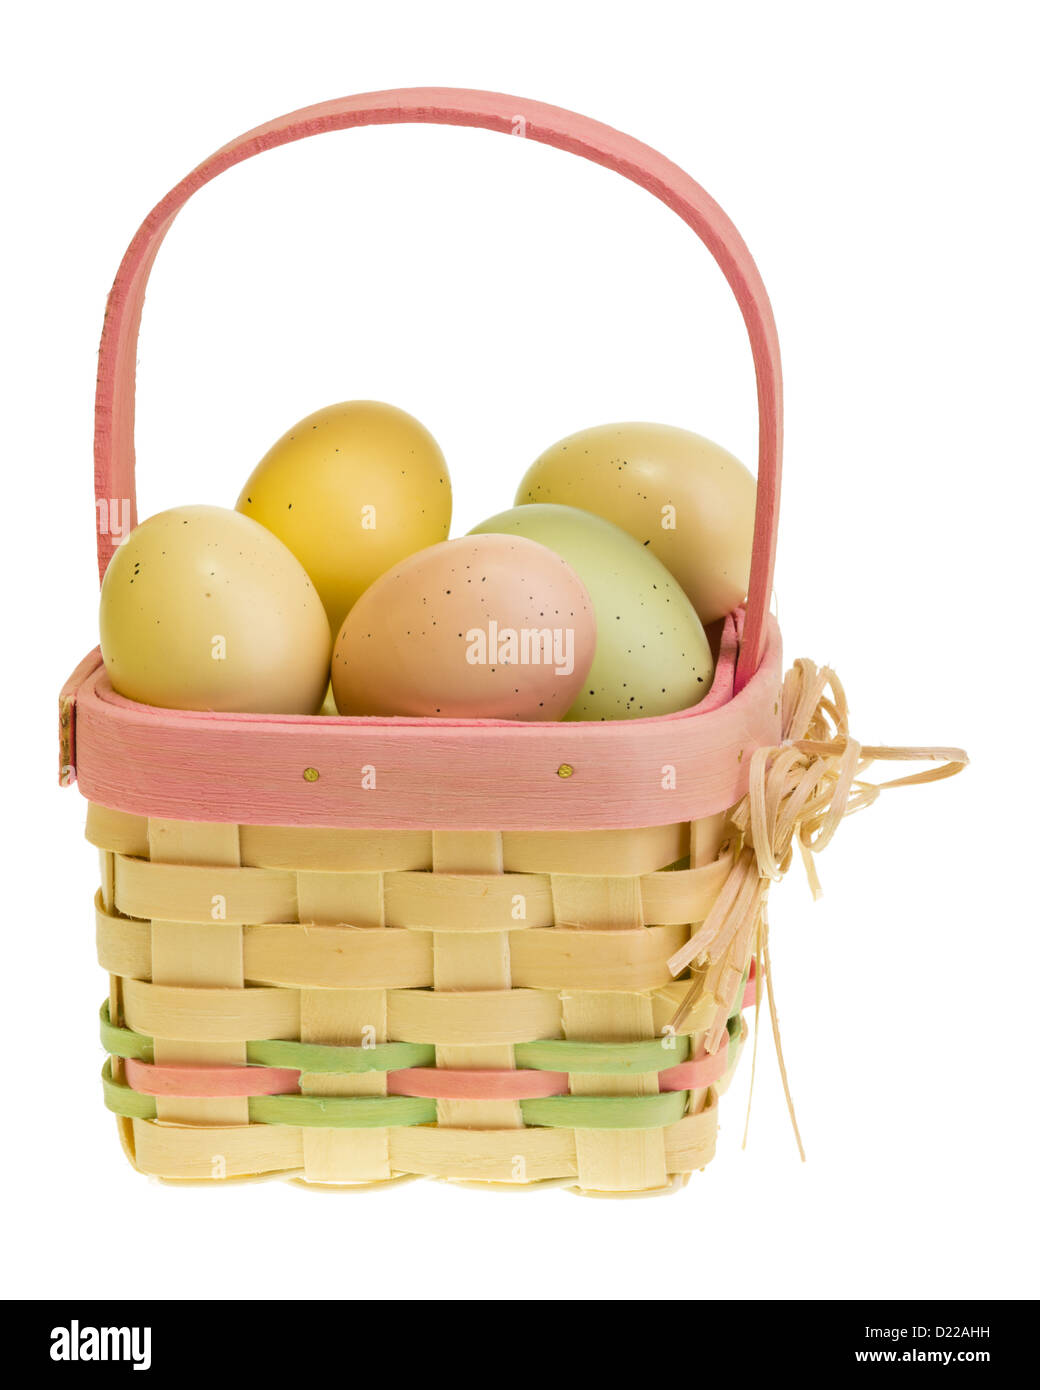 A wicker Easter basket filled with eggs Stock Photo